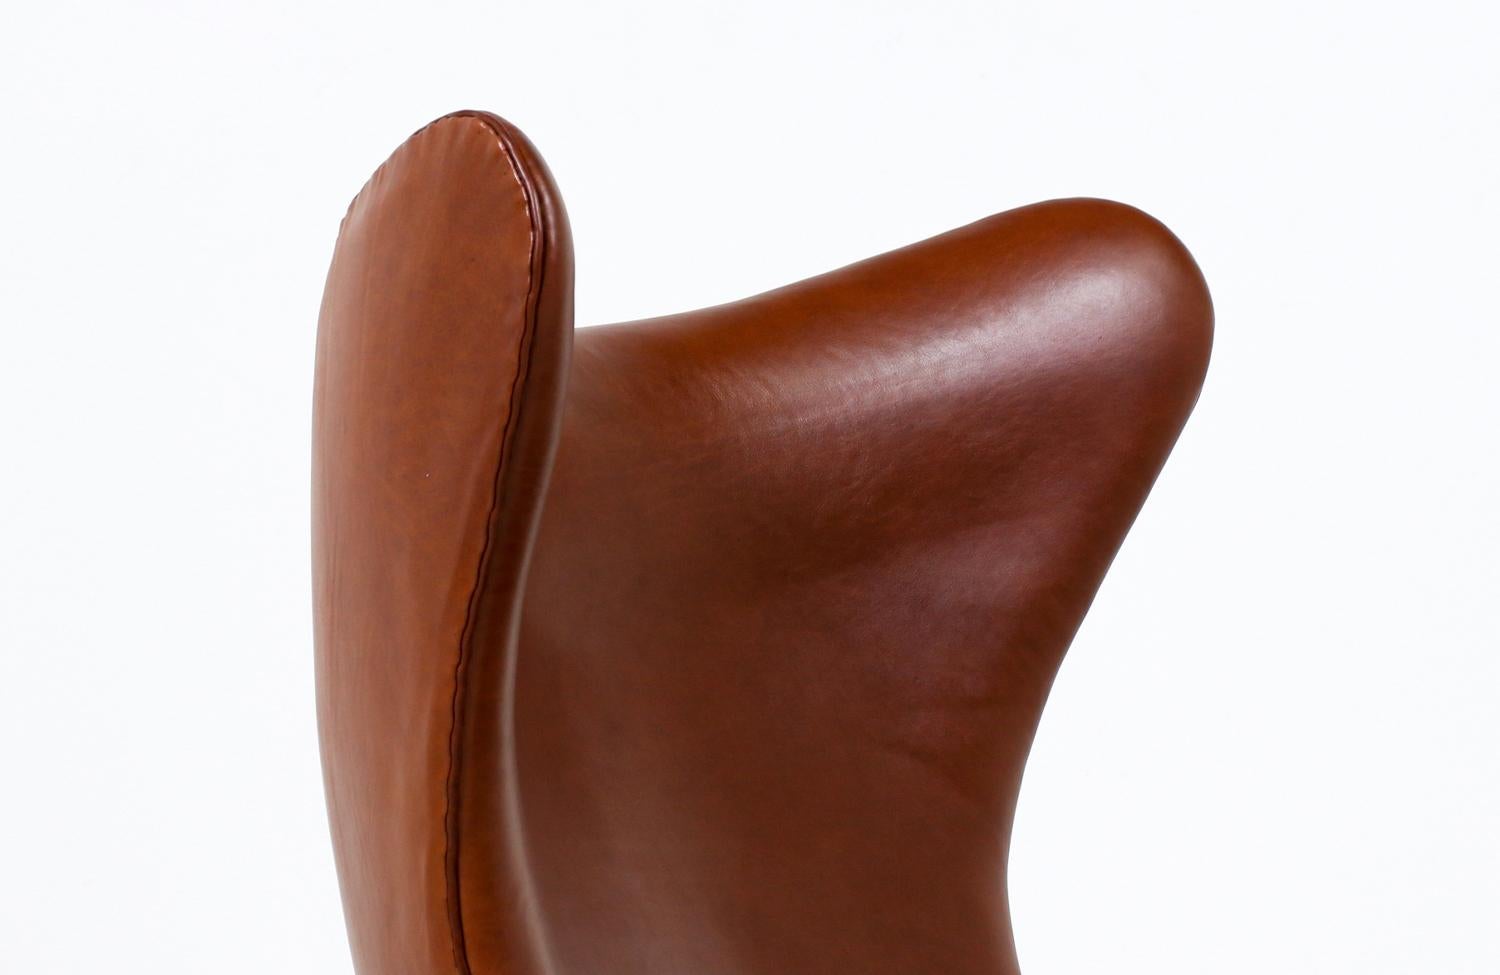 Expertly Restored - Danish Modern Cognac Leather “Egg” Chair by Arne Jacobsen For Sale 2